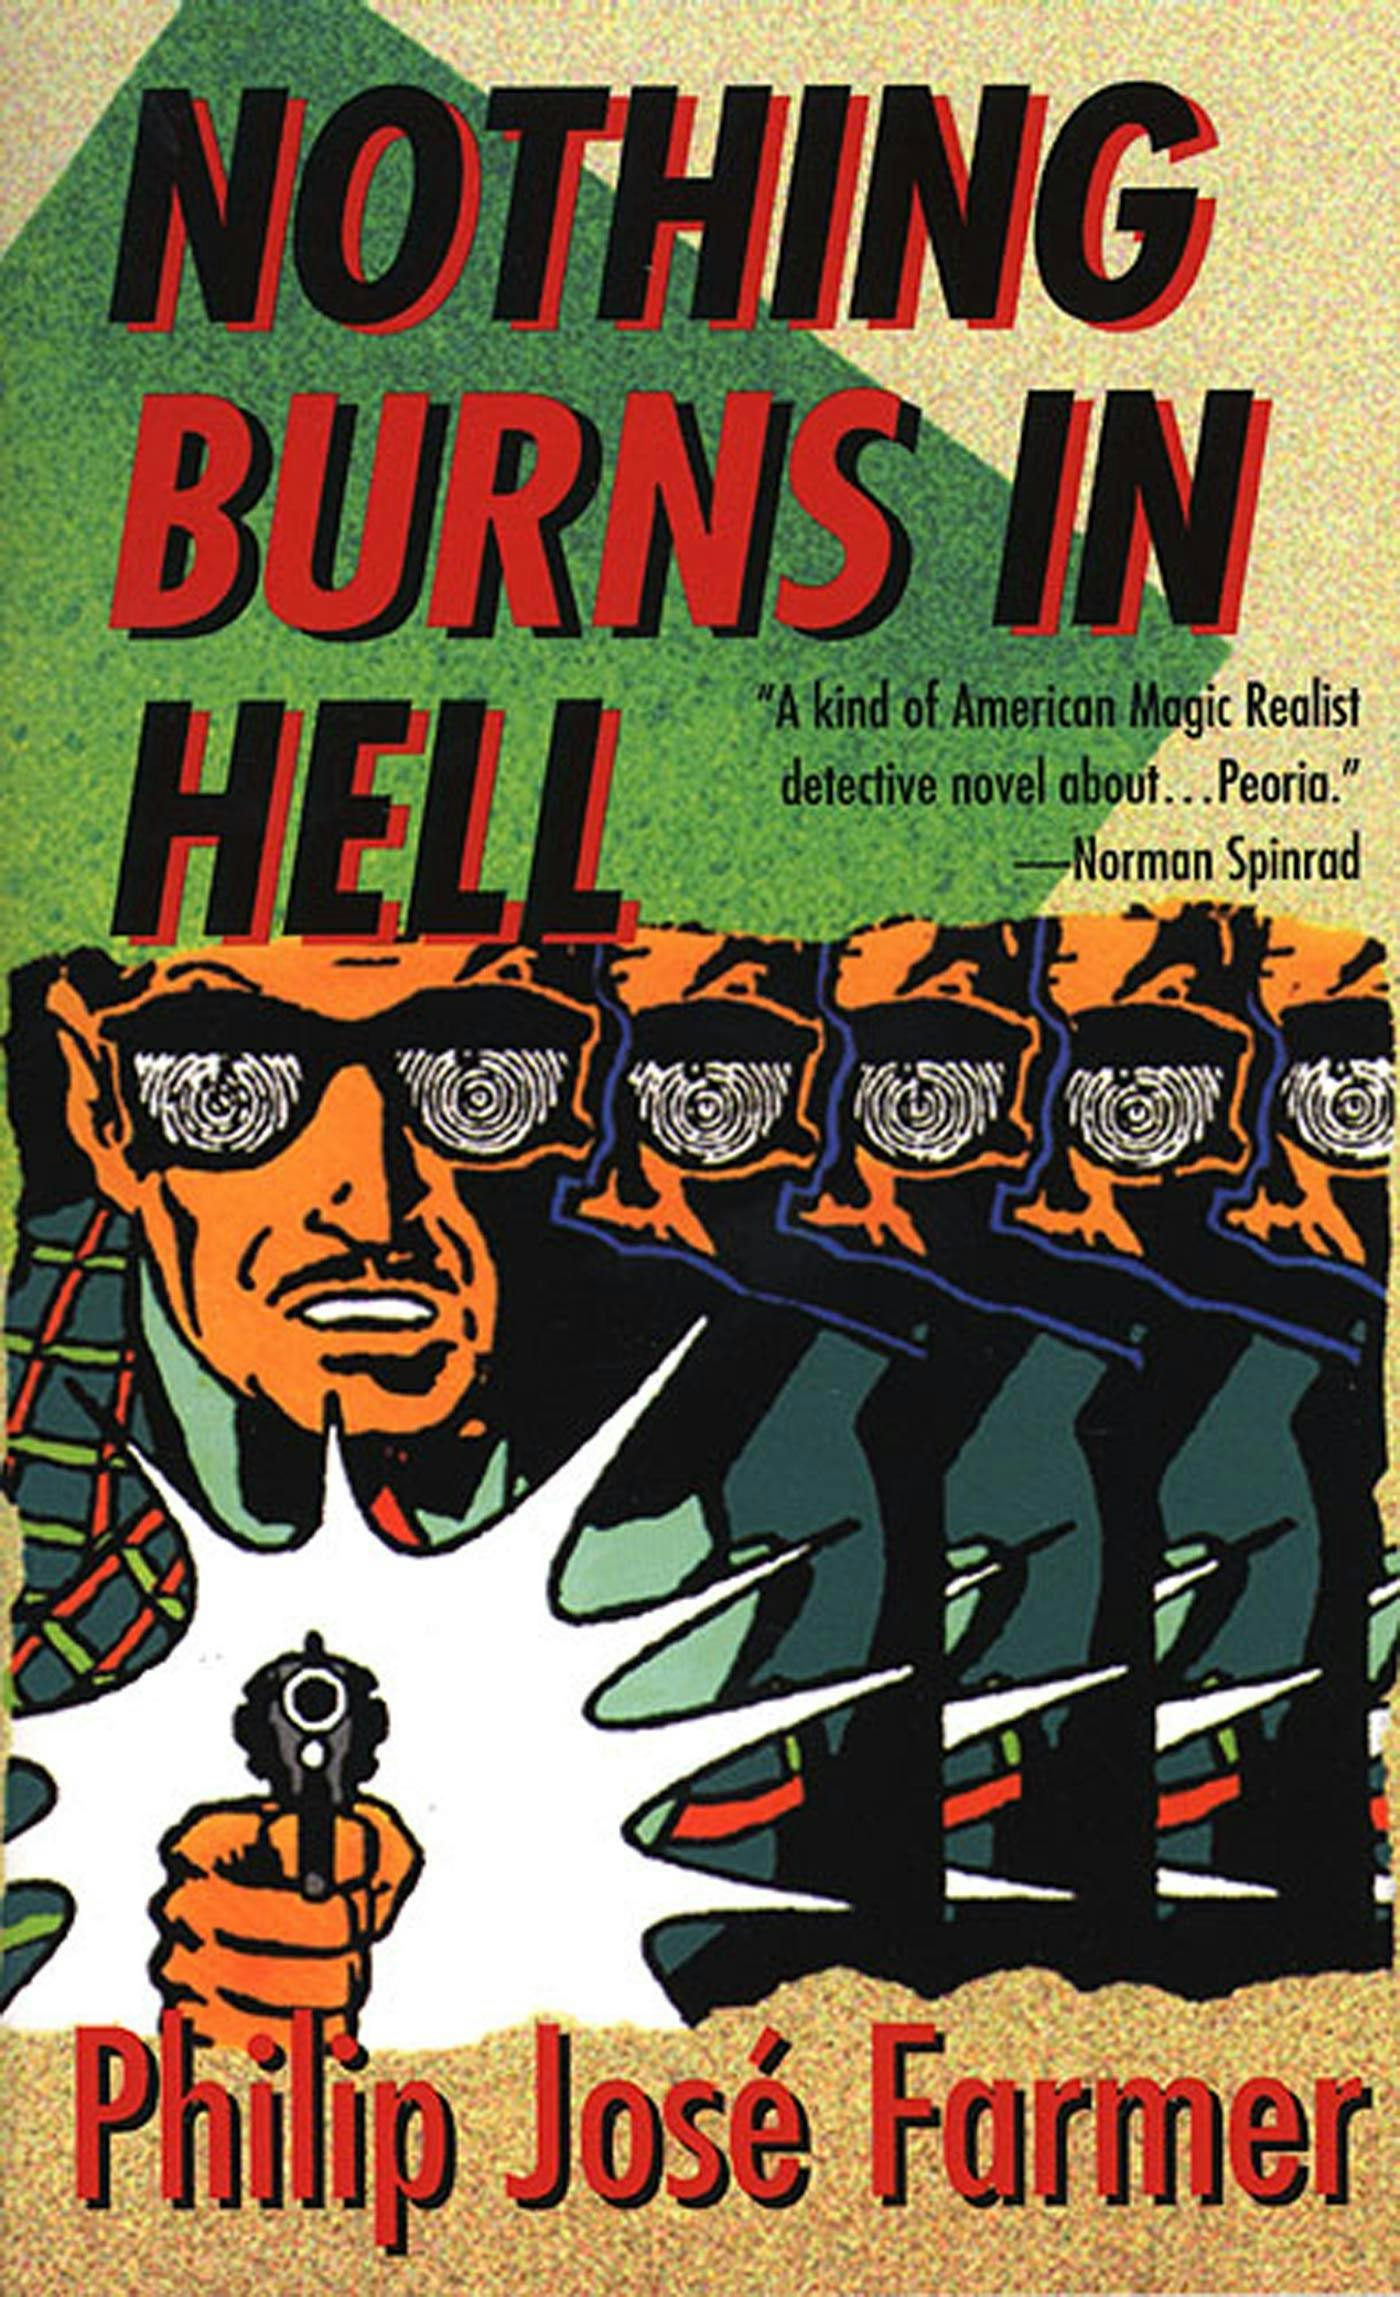 Cover for the book titled as: Nothing Burns in Hell